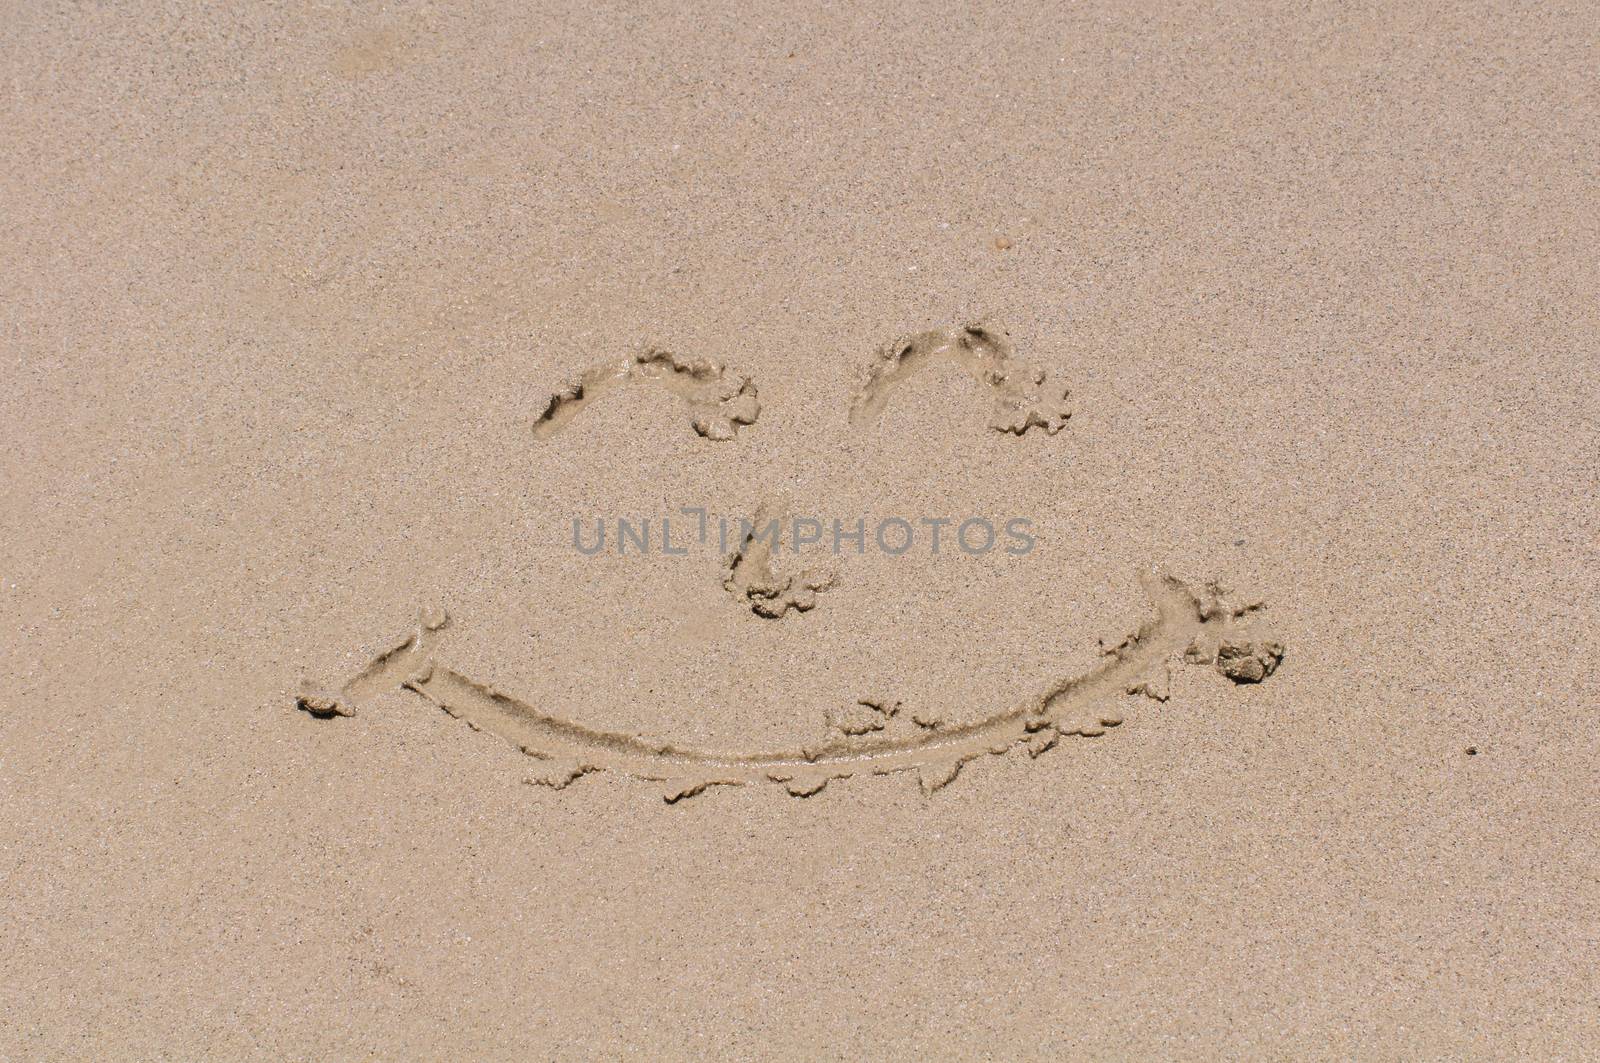 Drawing a smiley face on the sand.